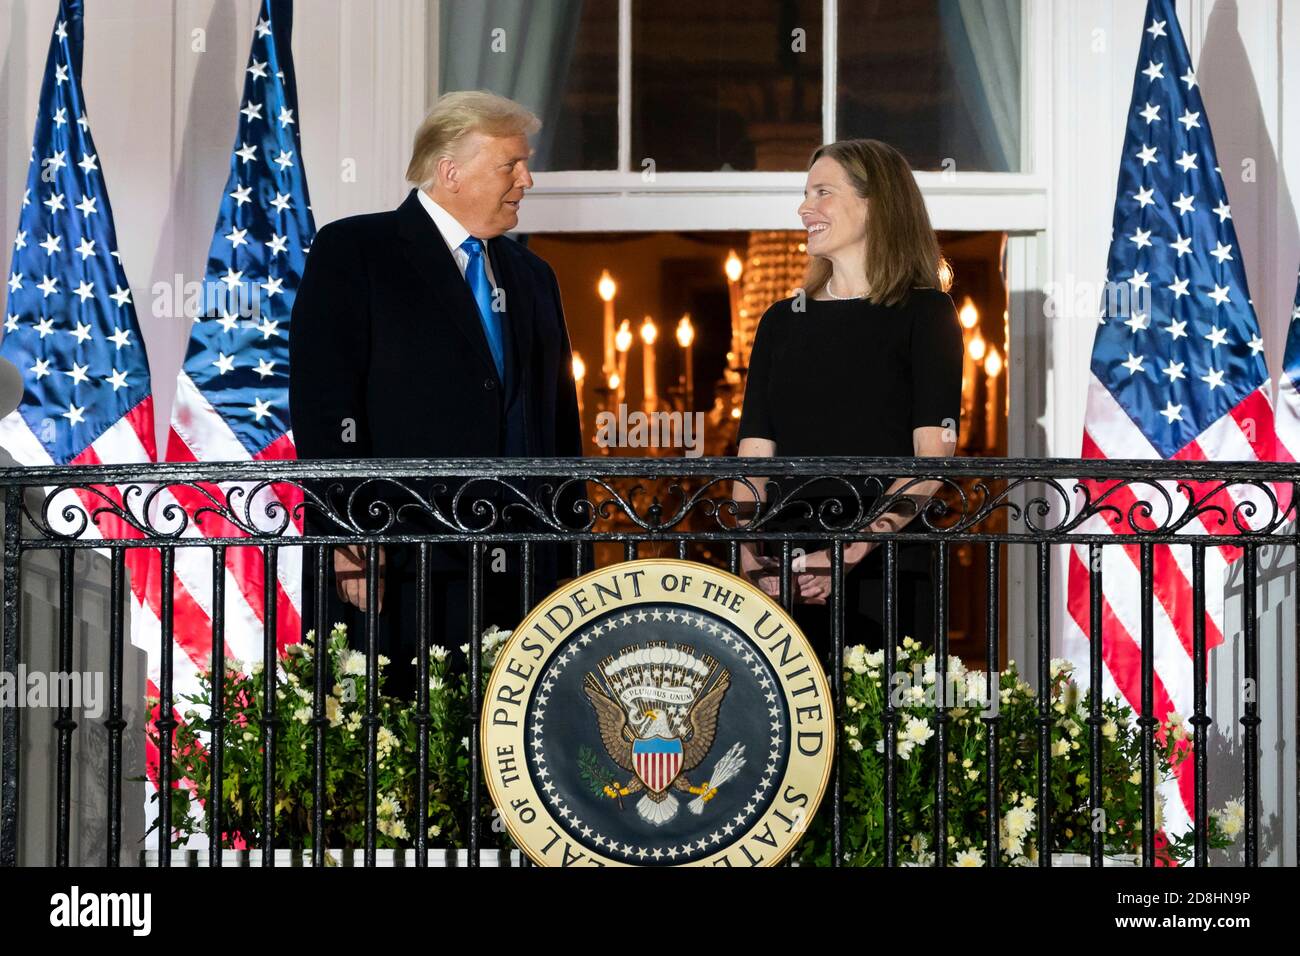 U.S President Donald Trump with Supreme Court Associate Justice Amy Coney Barrett on the Blue Room Balcony of the White House following the swearing in ceremony October 26, 2020 in Washington, DC. Stock Photo